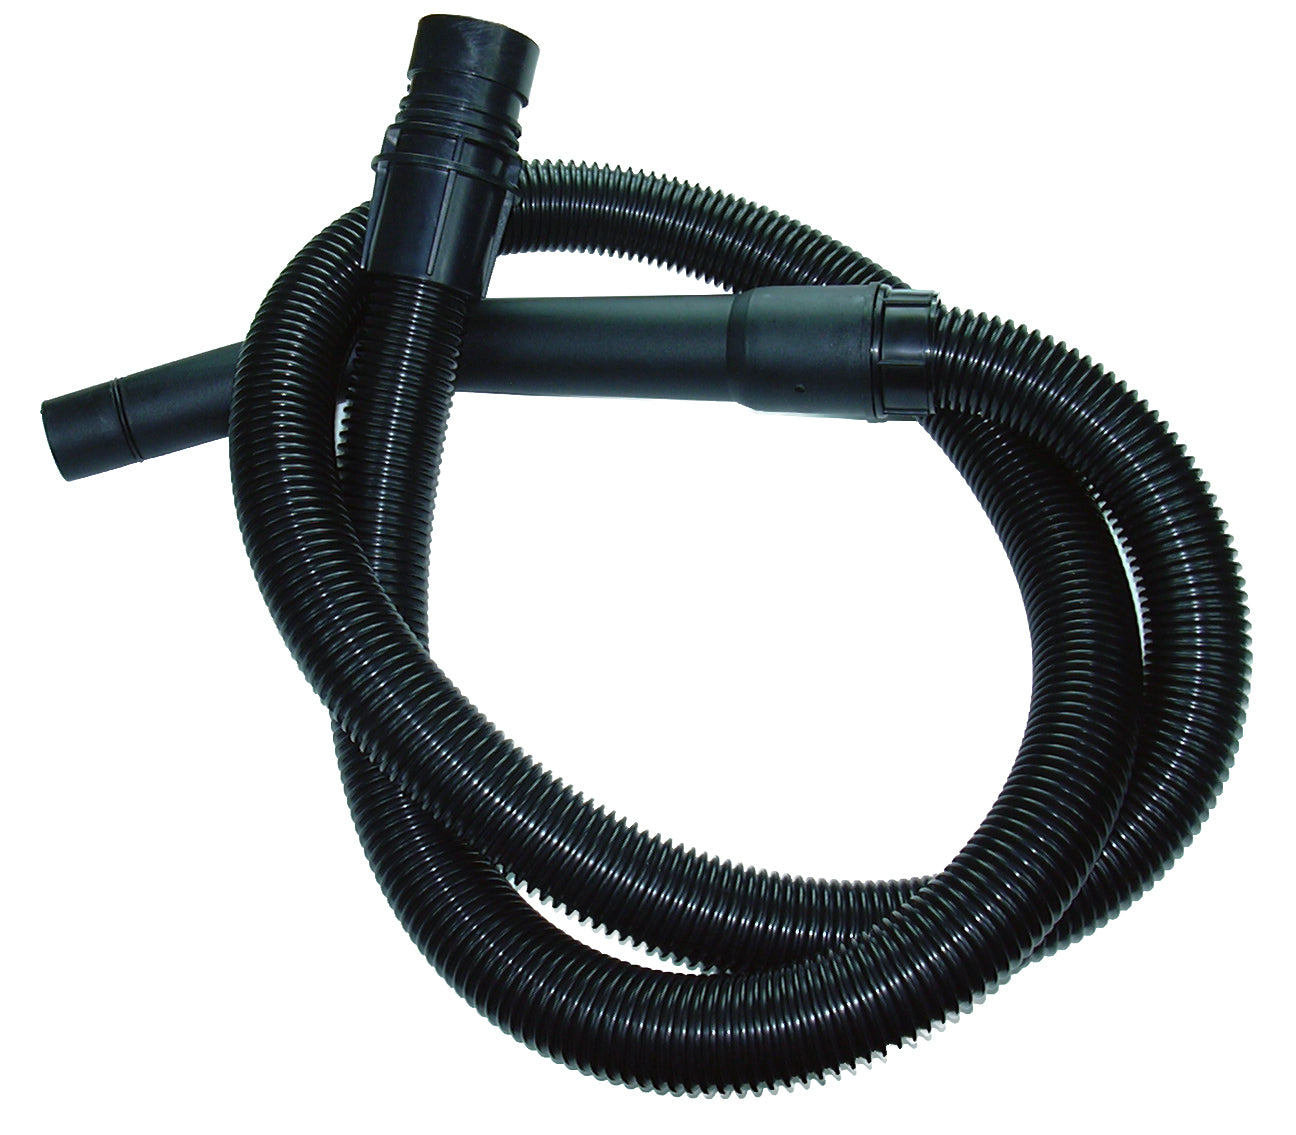 Soteco 90001b 36mm hose assembly with bend